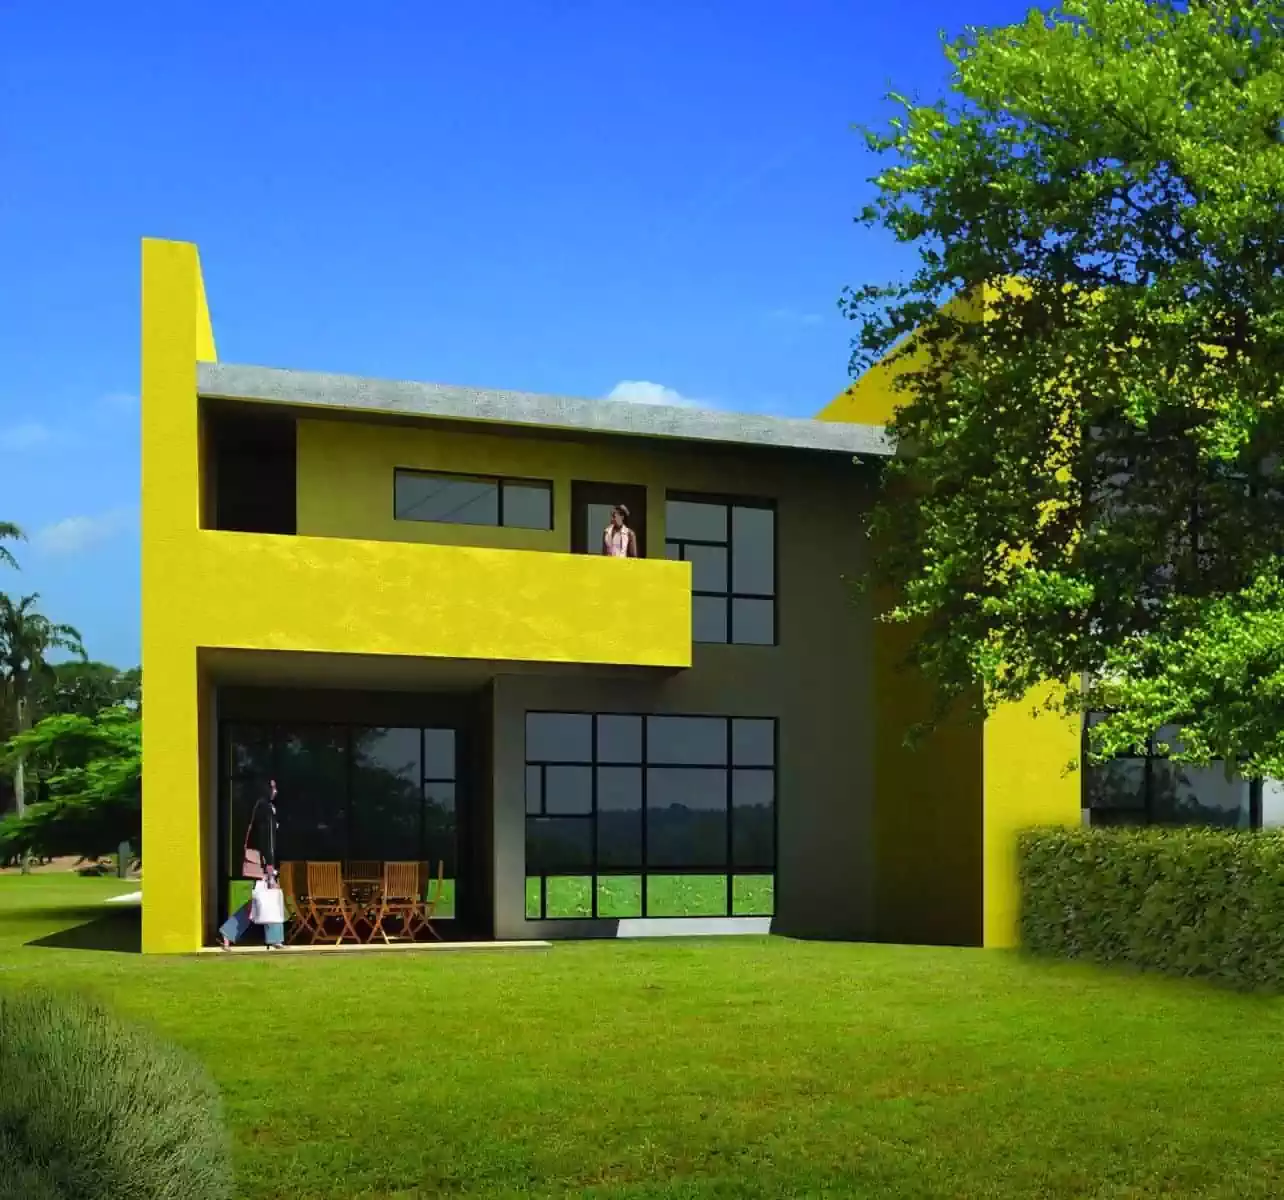 Backyard and veranda of modern cluster house. Brightly coloured overhanging balcony by architect from harare